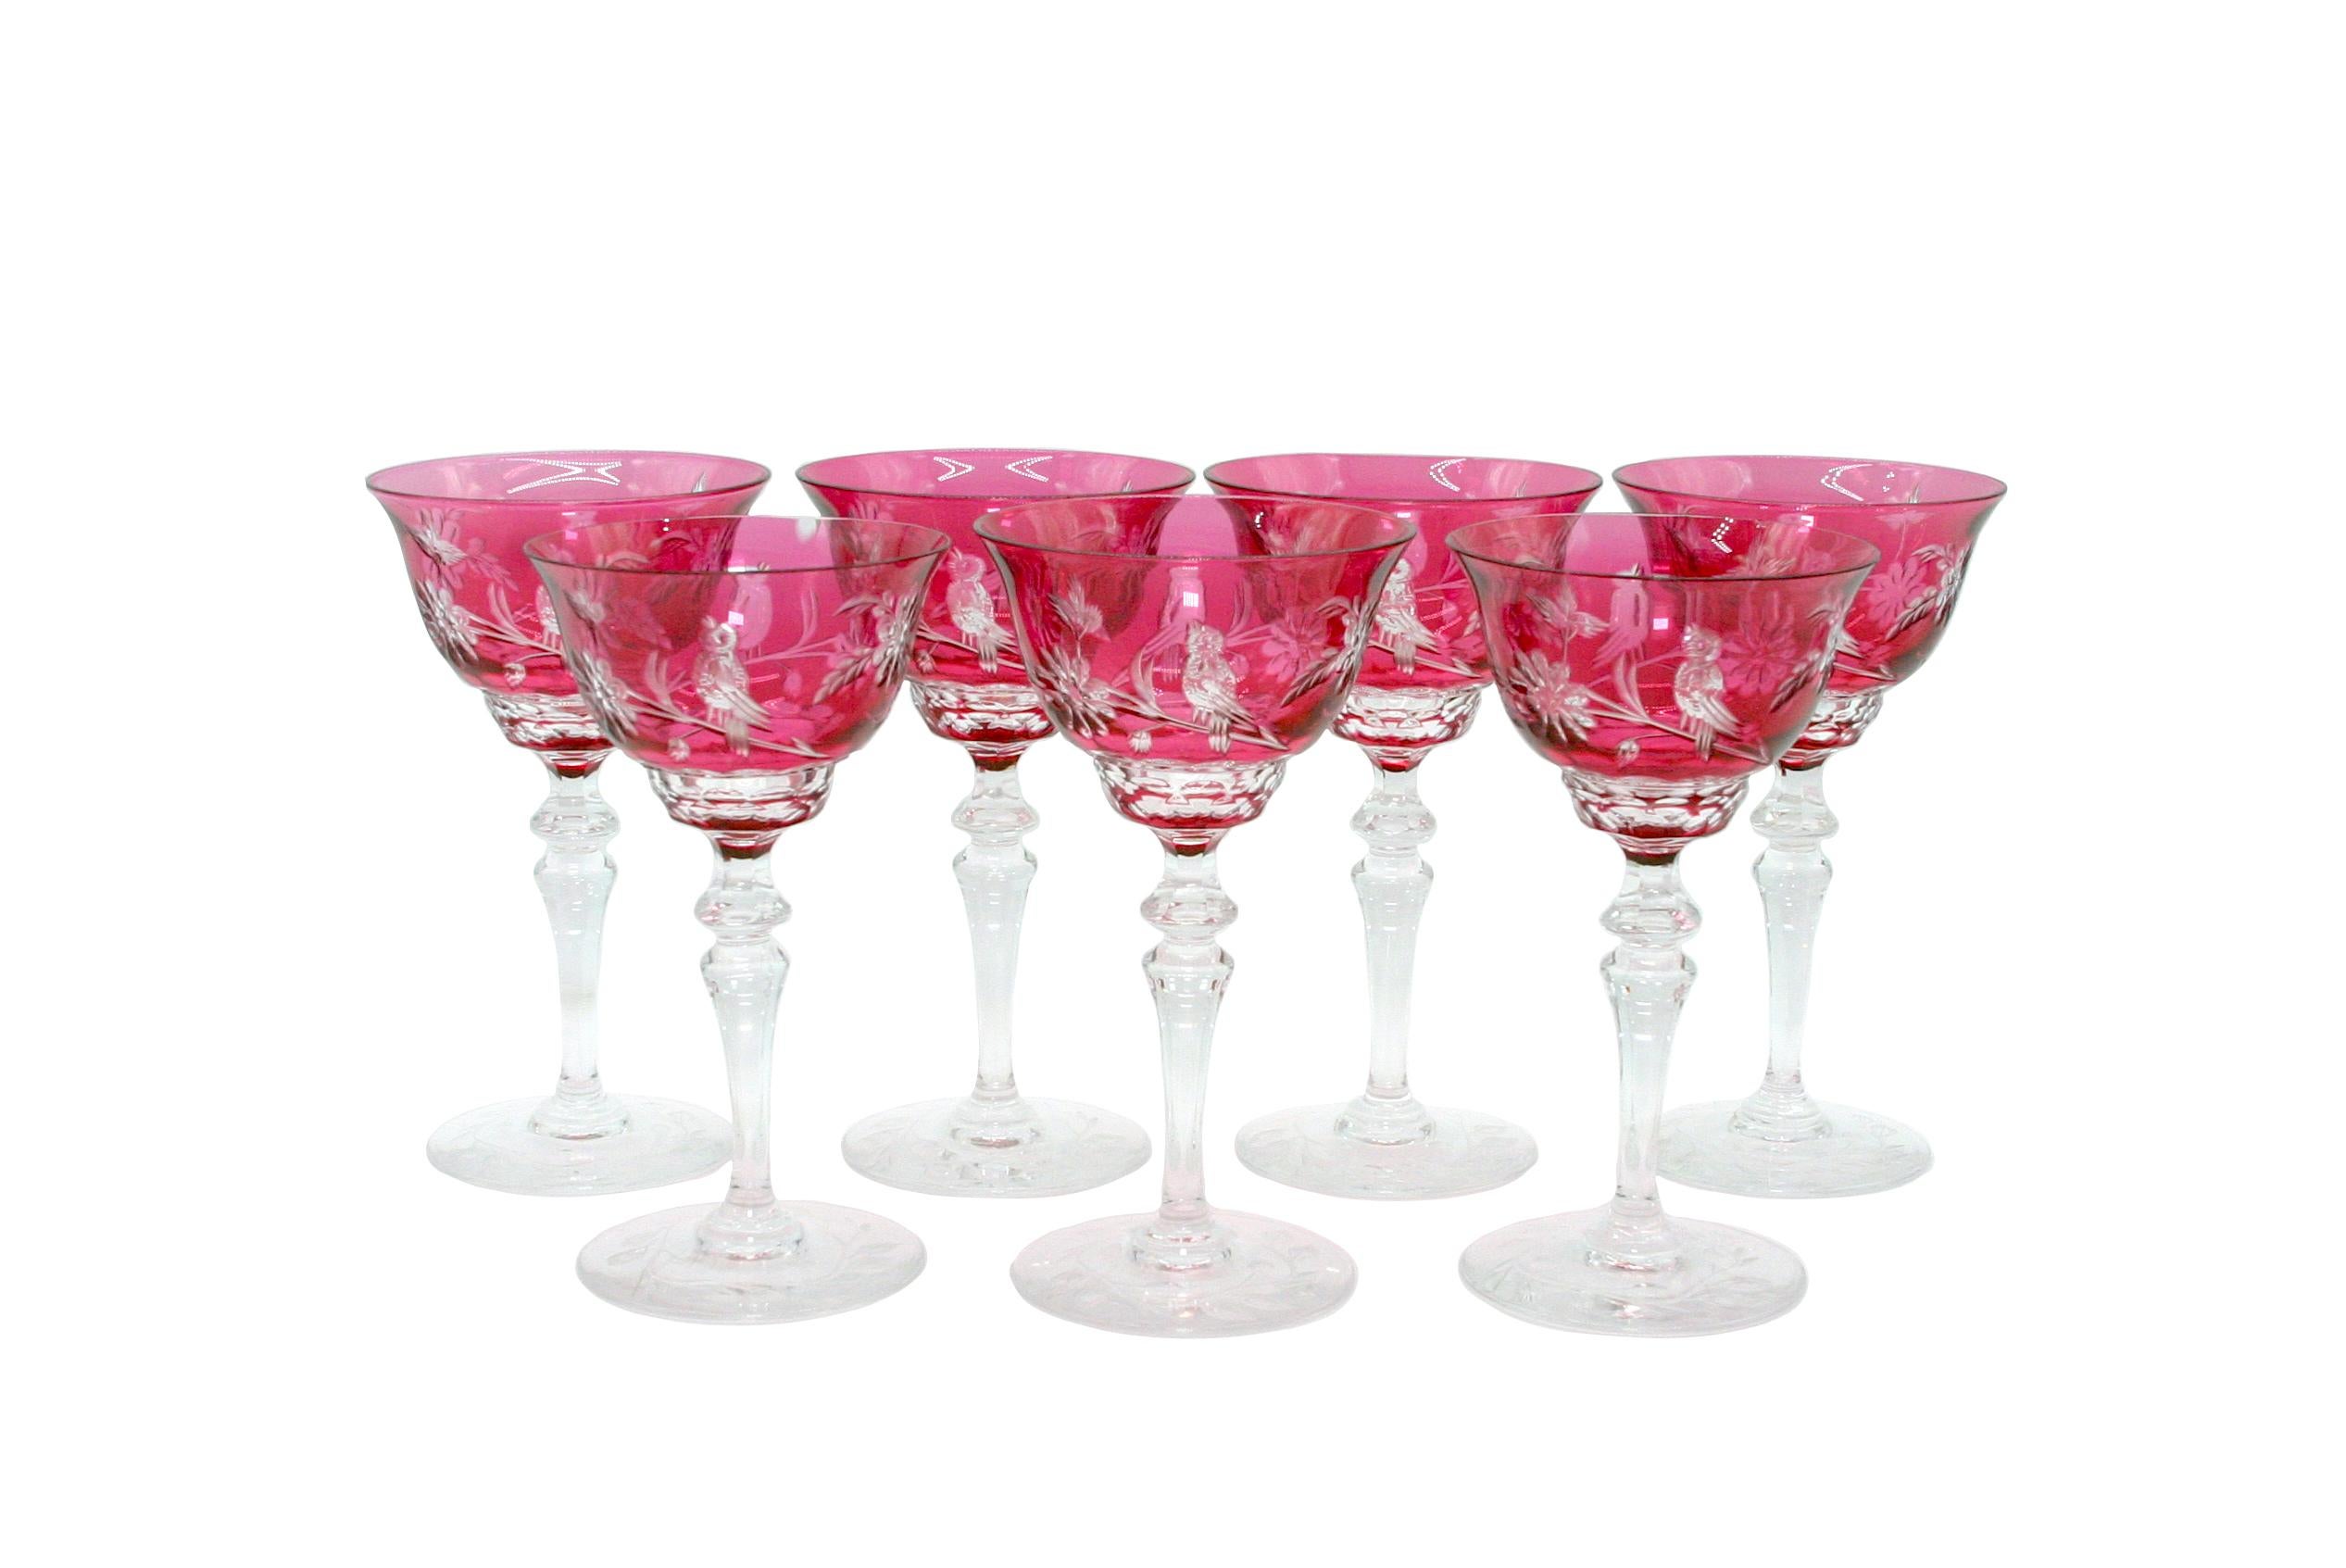 Val Saint Lambert barware / tableware cranberry crystal service for 8 people. Val crystal is regarded as some of the most magnificent ever made and renowned for their exquisite color. This specific pattern, a variant of their renowned 